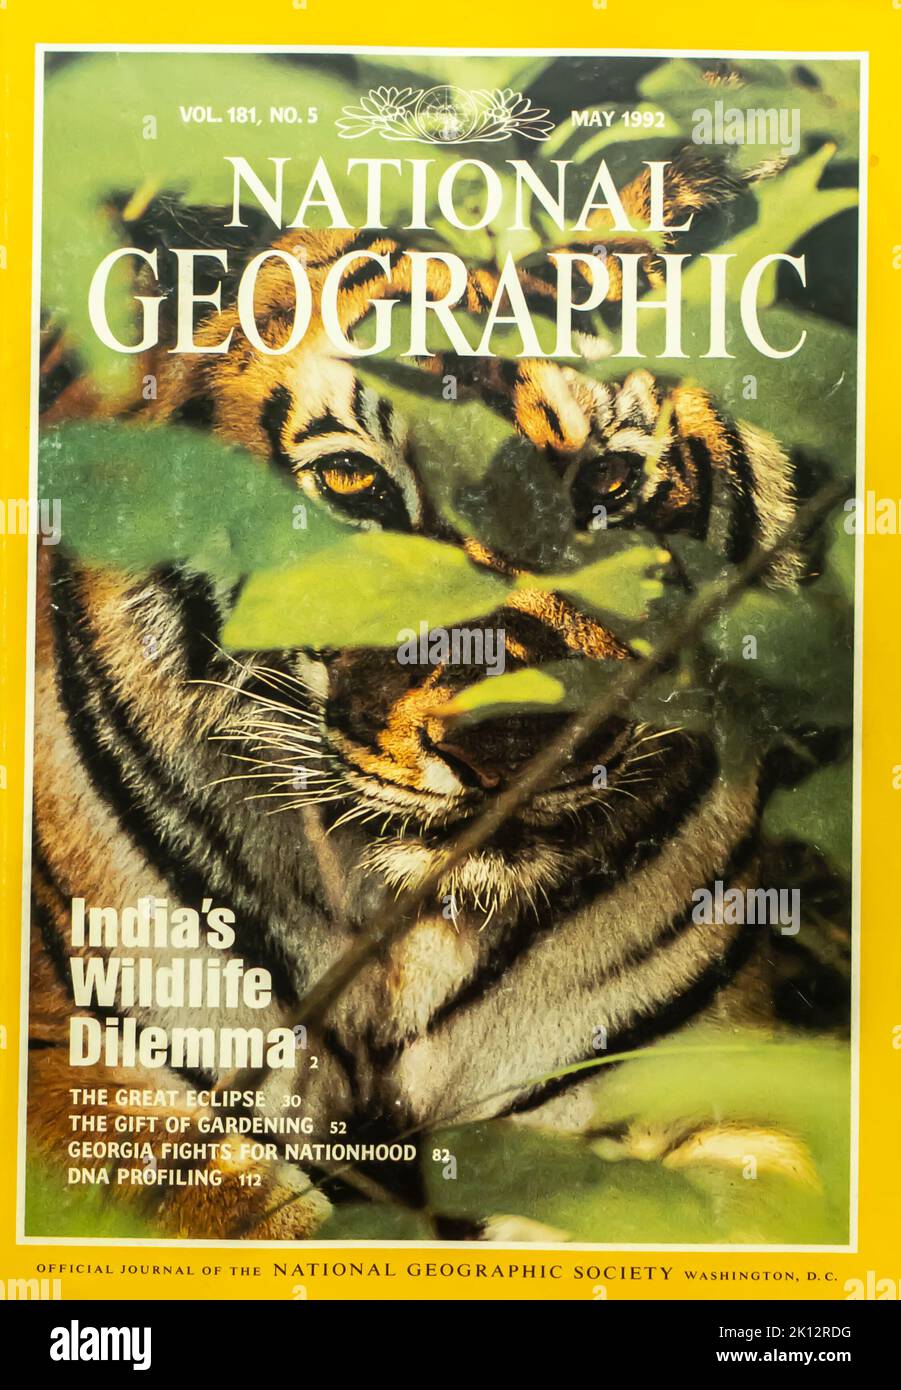 National Geographic magazine cover, May 1992 Stock Photo